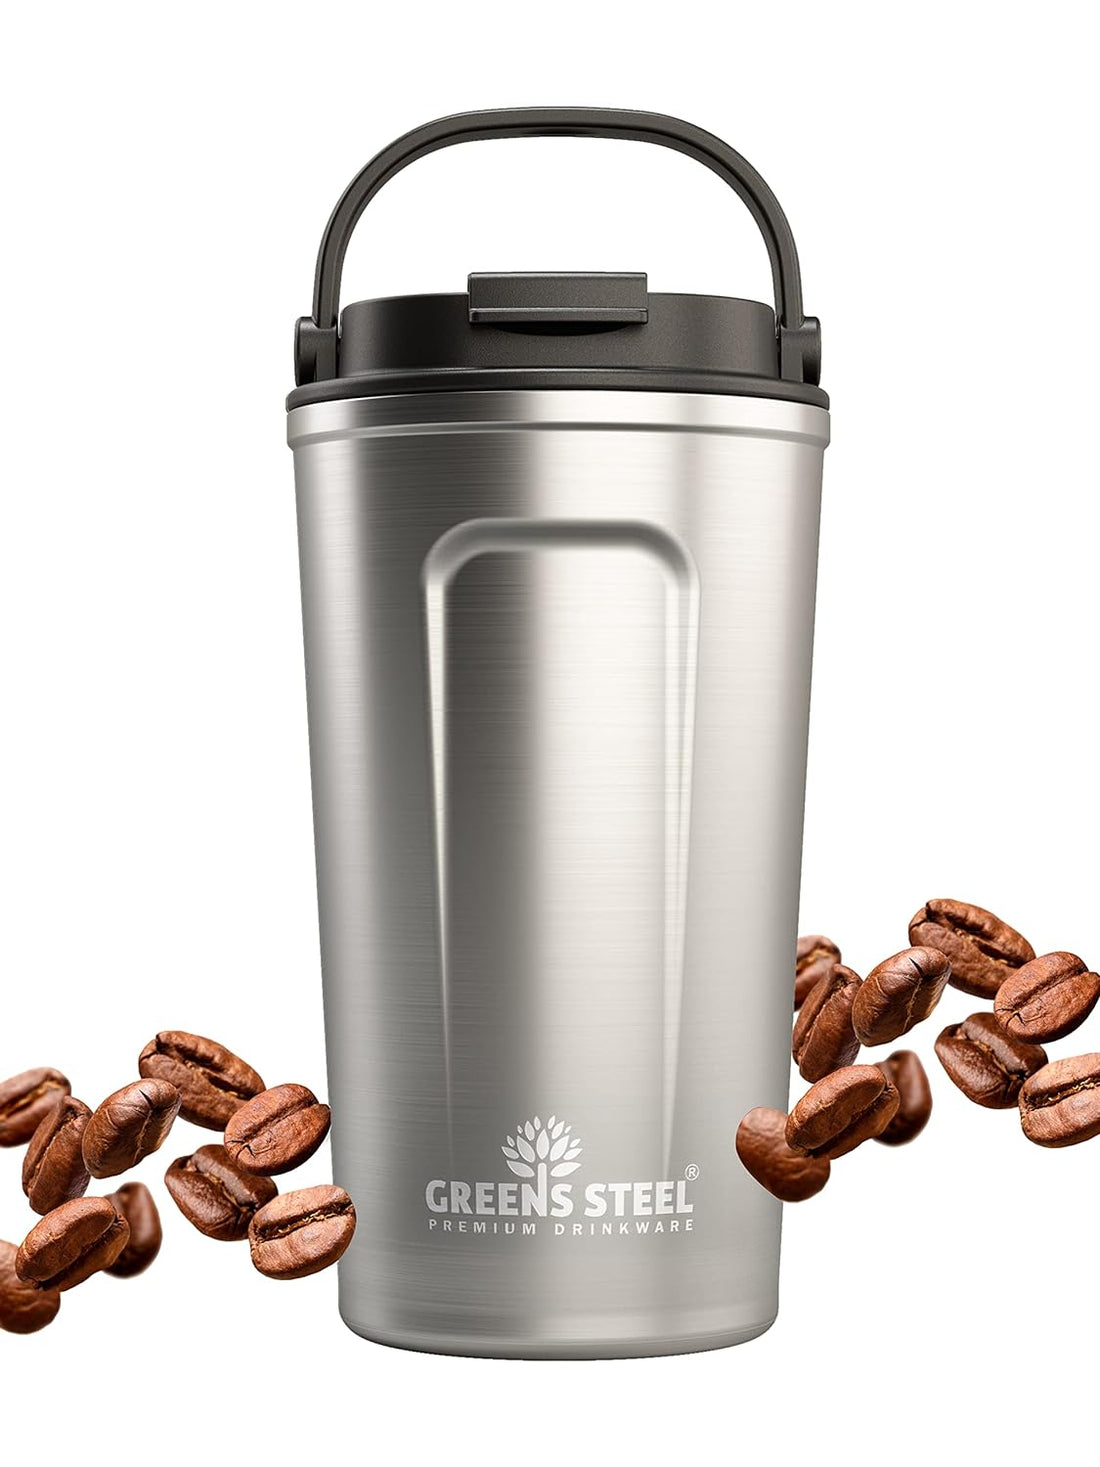 Reusable Coffee Cup with Lid and Handle - Stainless Steel Insulated Coffee Mug for Hot & Cold Drinks - Ideal Travel Mugs - 100% Leak-Proof Tumbler - 16 oz Steel